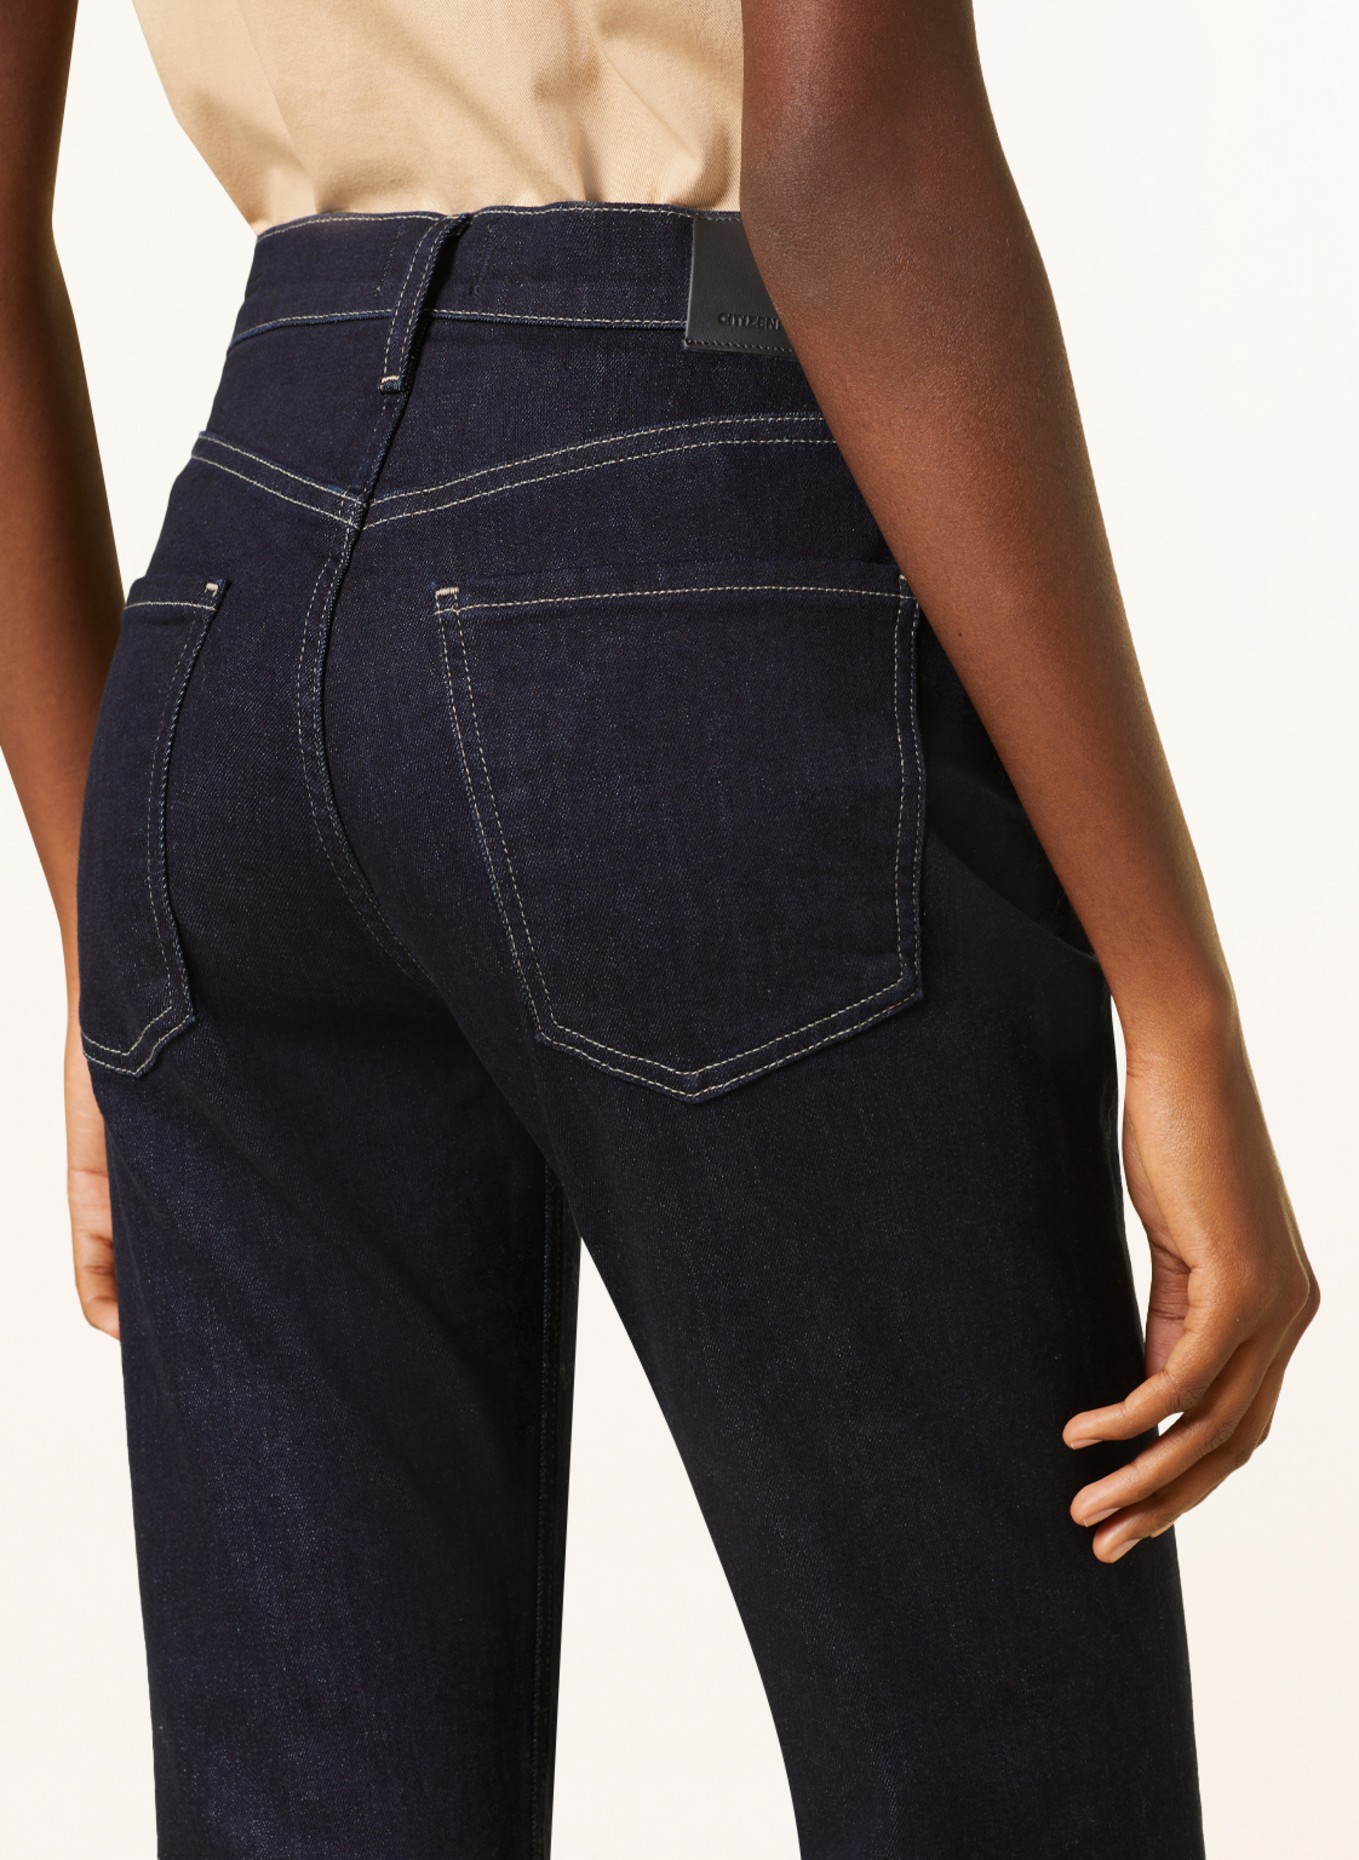 CITIZENS of HUMANITY Jeans ISOLA, Farbe: Solace dk indigo (Bild 5)